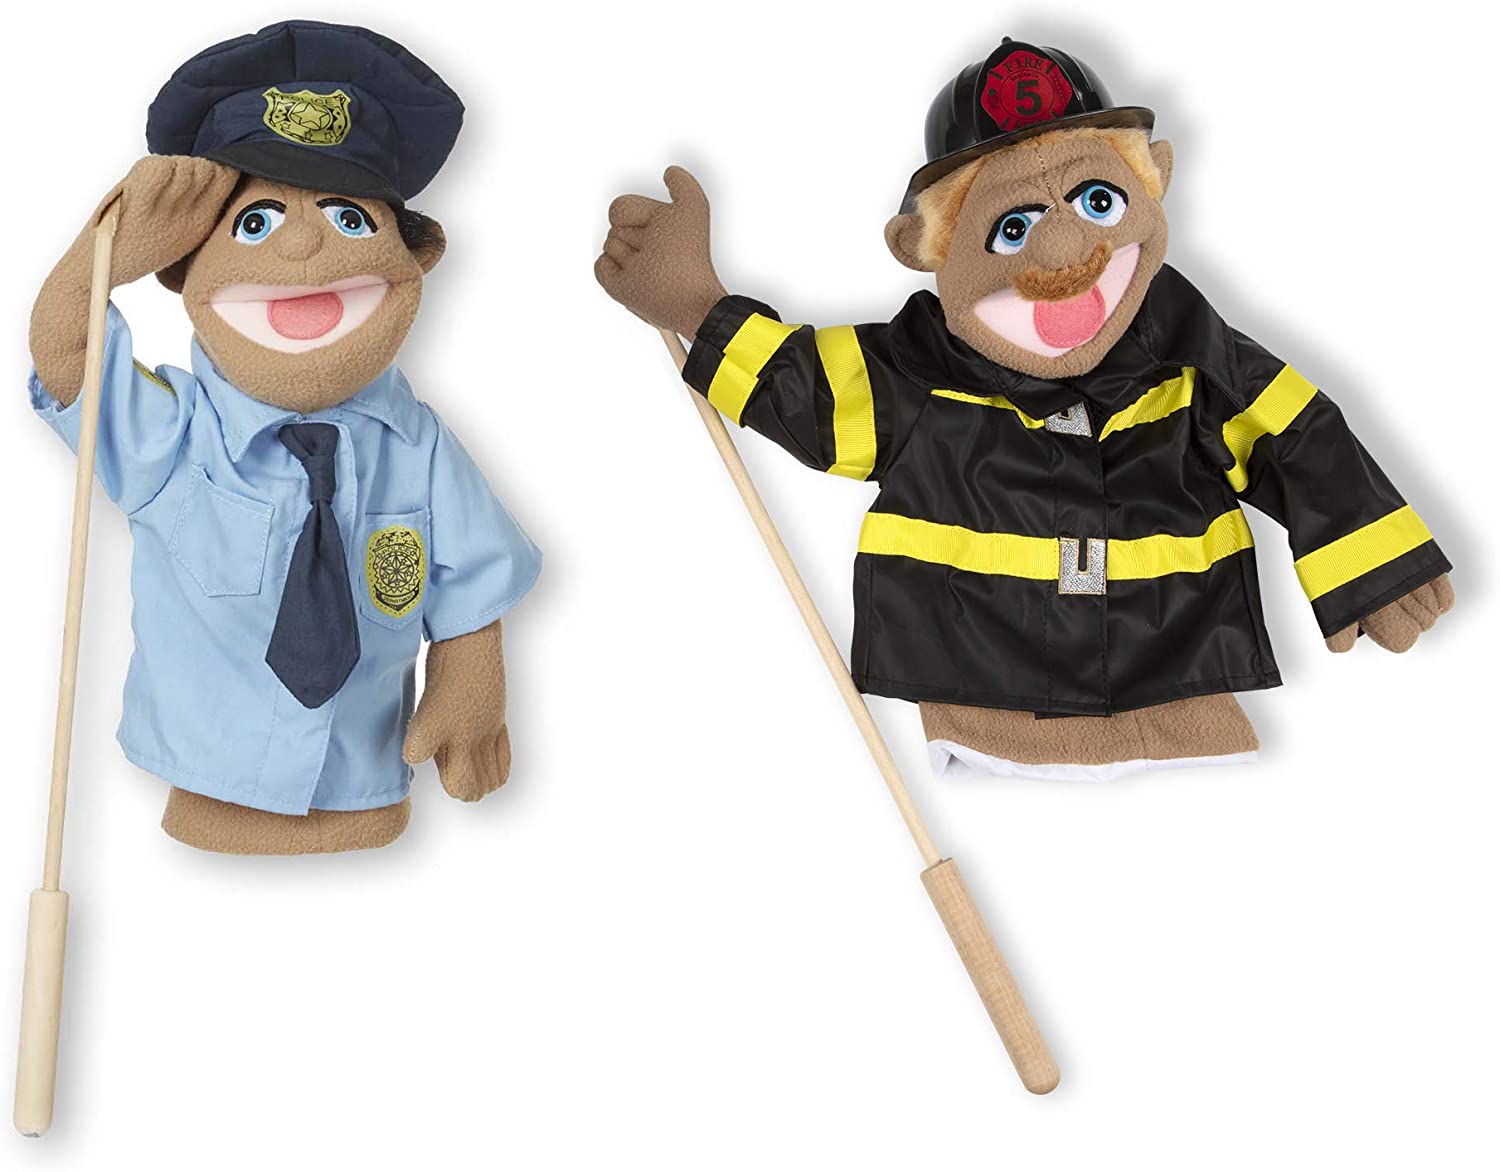 Melissa & Doug Rescue Puppet Set - Police Officer and Firefighter